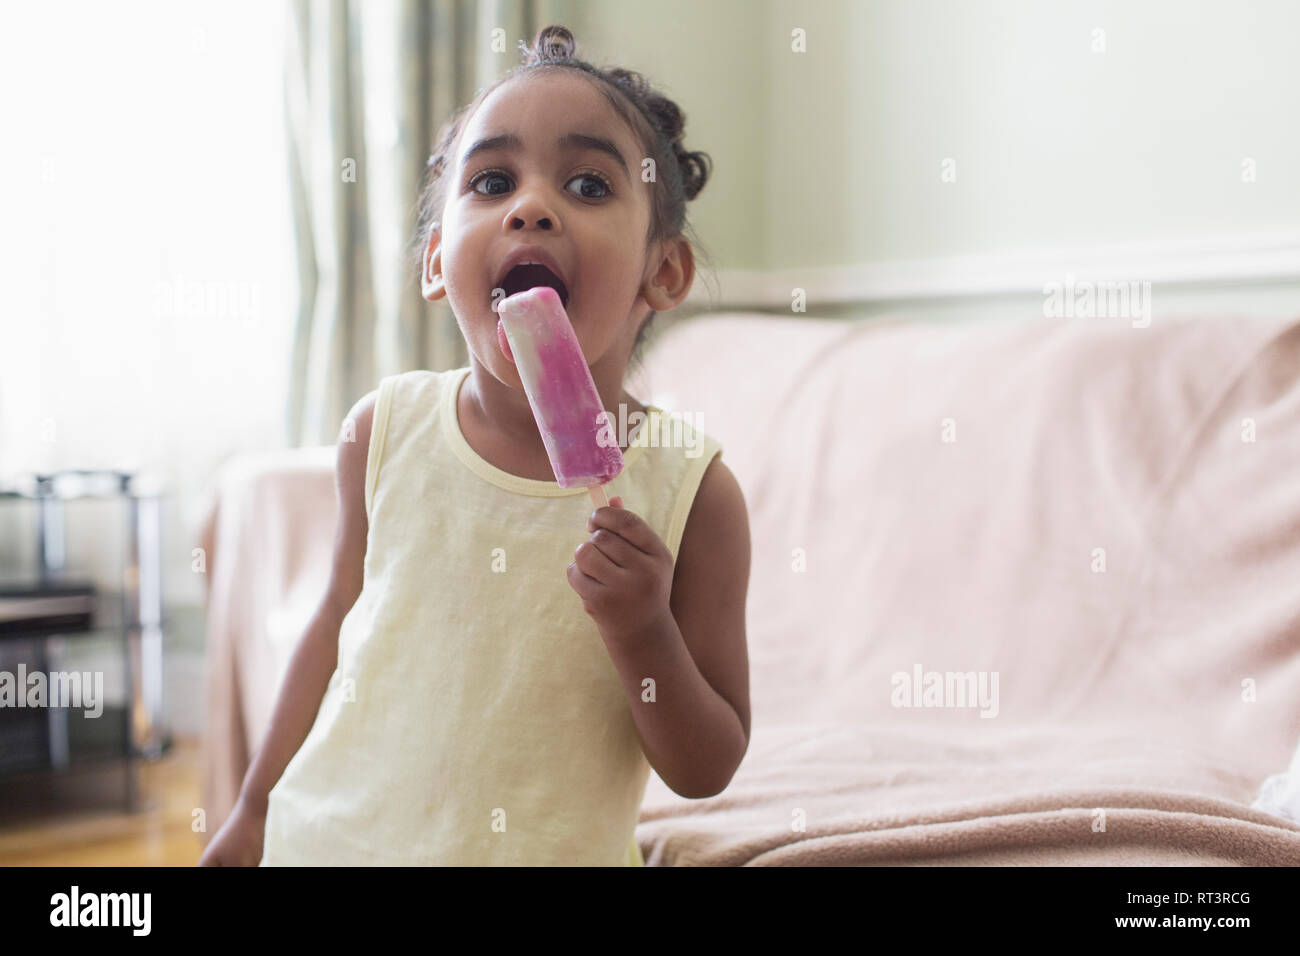 Cute toddler girl eating flavored ice Stock Photo